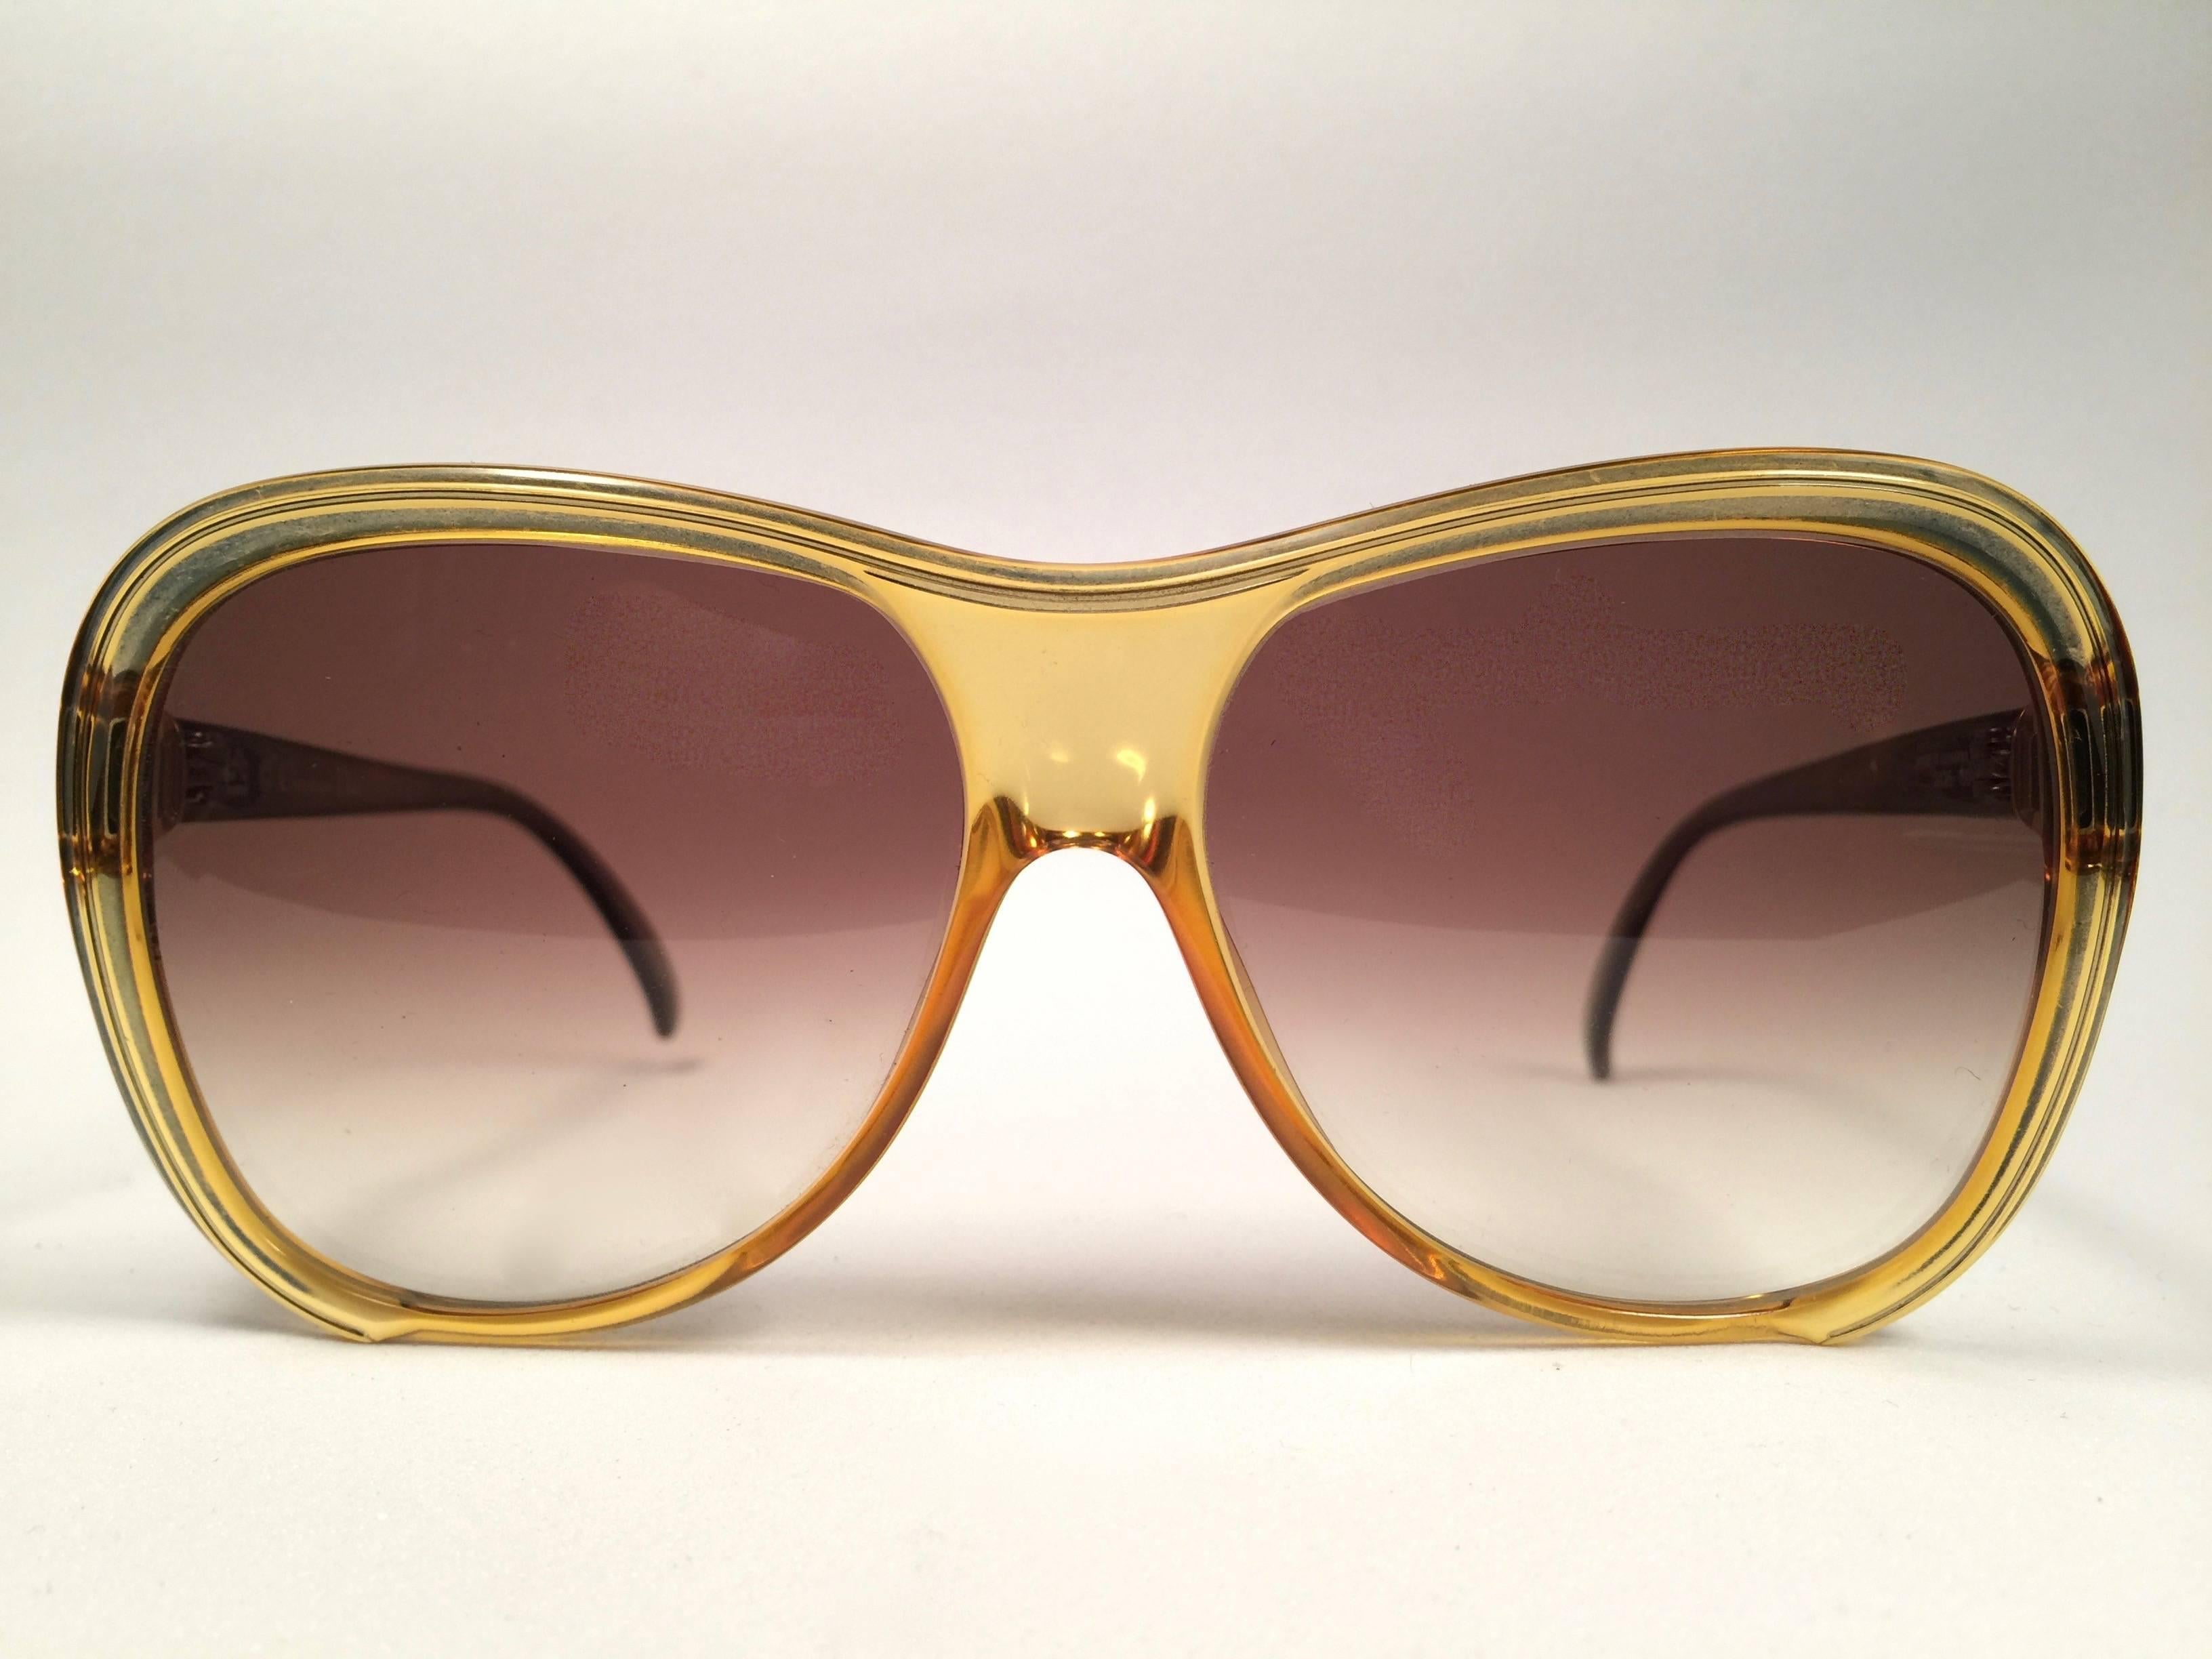 Mint Vintage Christian Dior 2125 Oversized translucent 1980's frame with spotless lenses.   
Made in Germany.  

Comes with its original silver Christian Dior Lunettes sleeve.